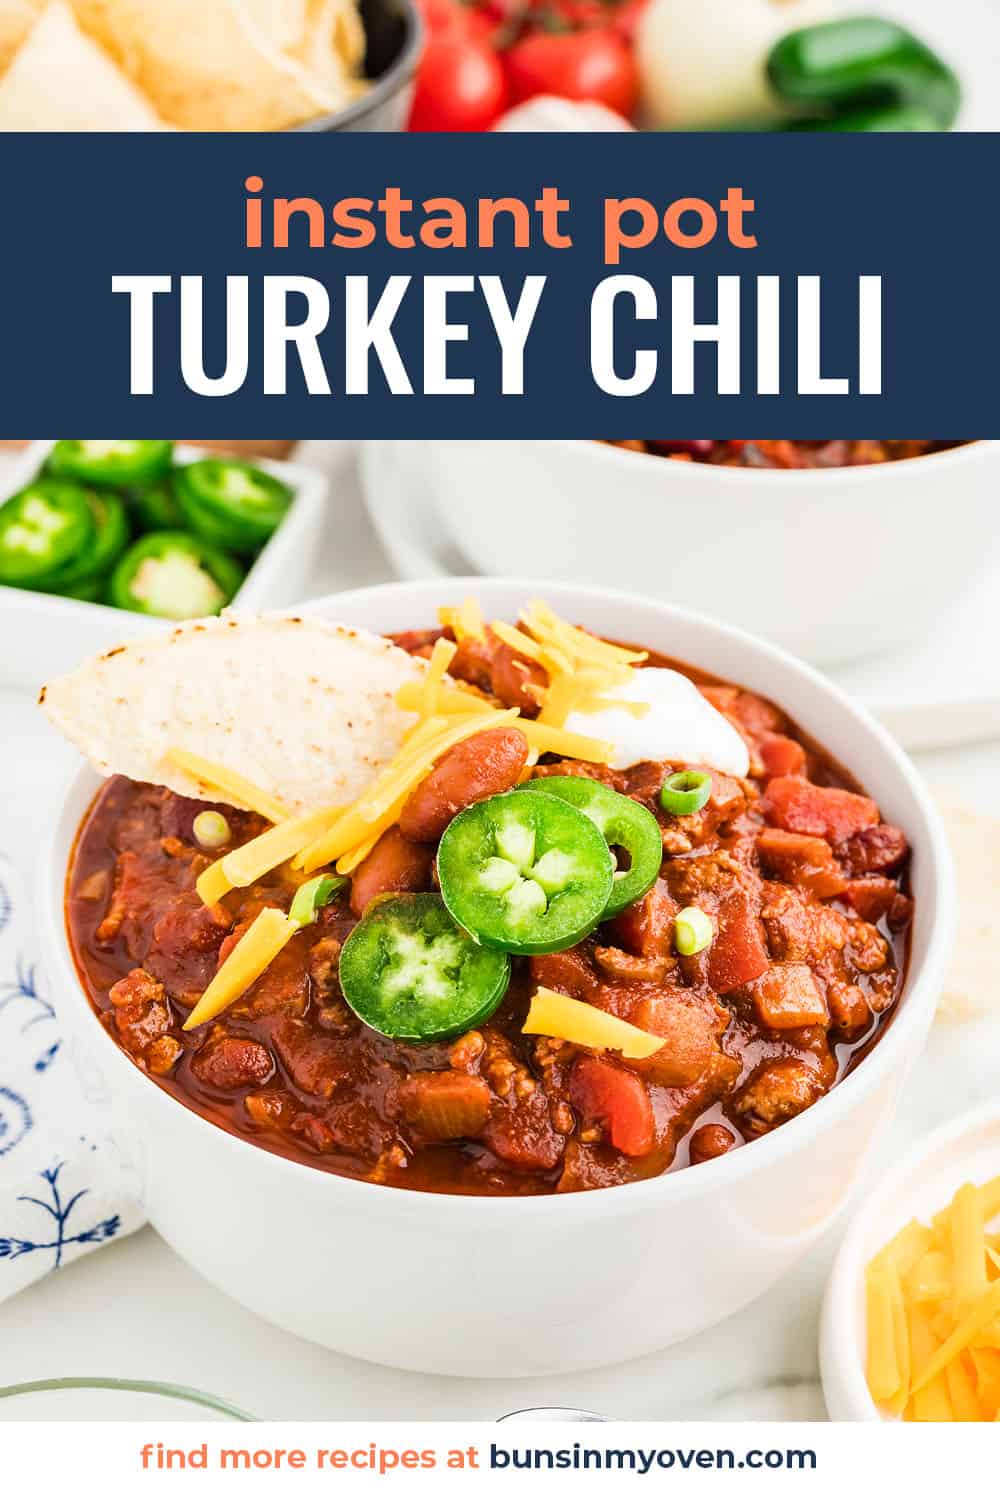 Bowl full of Instant Pot turkey chili recipe topped with jalapenos and cheese.